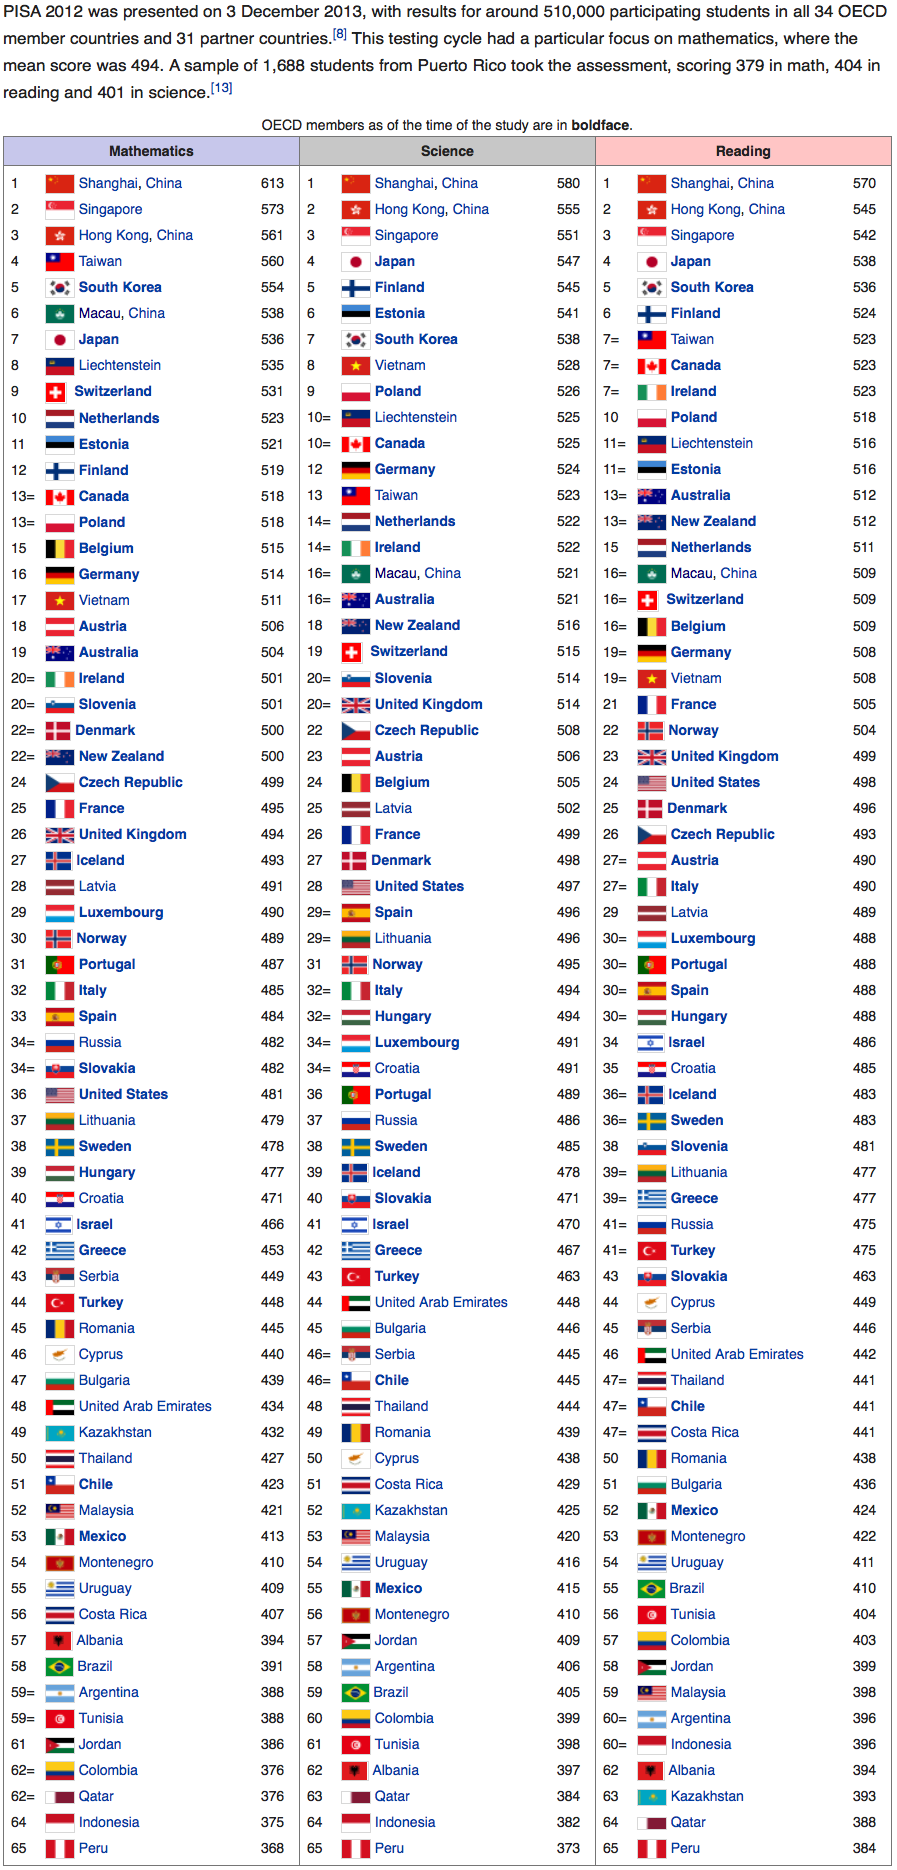 PISA 2012 country rankings in Mathematics, Science, and Reading